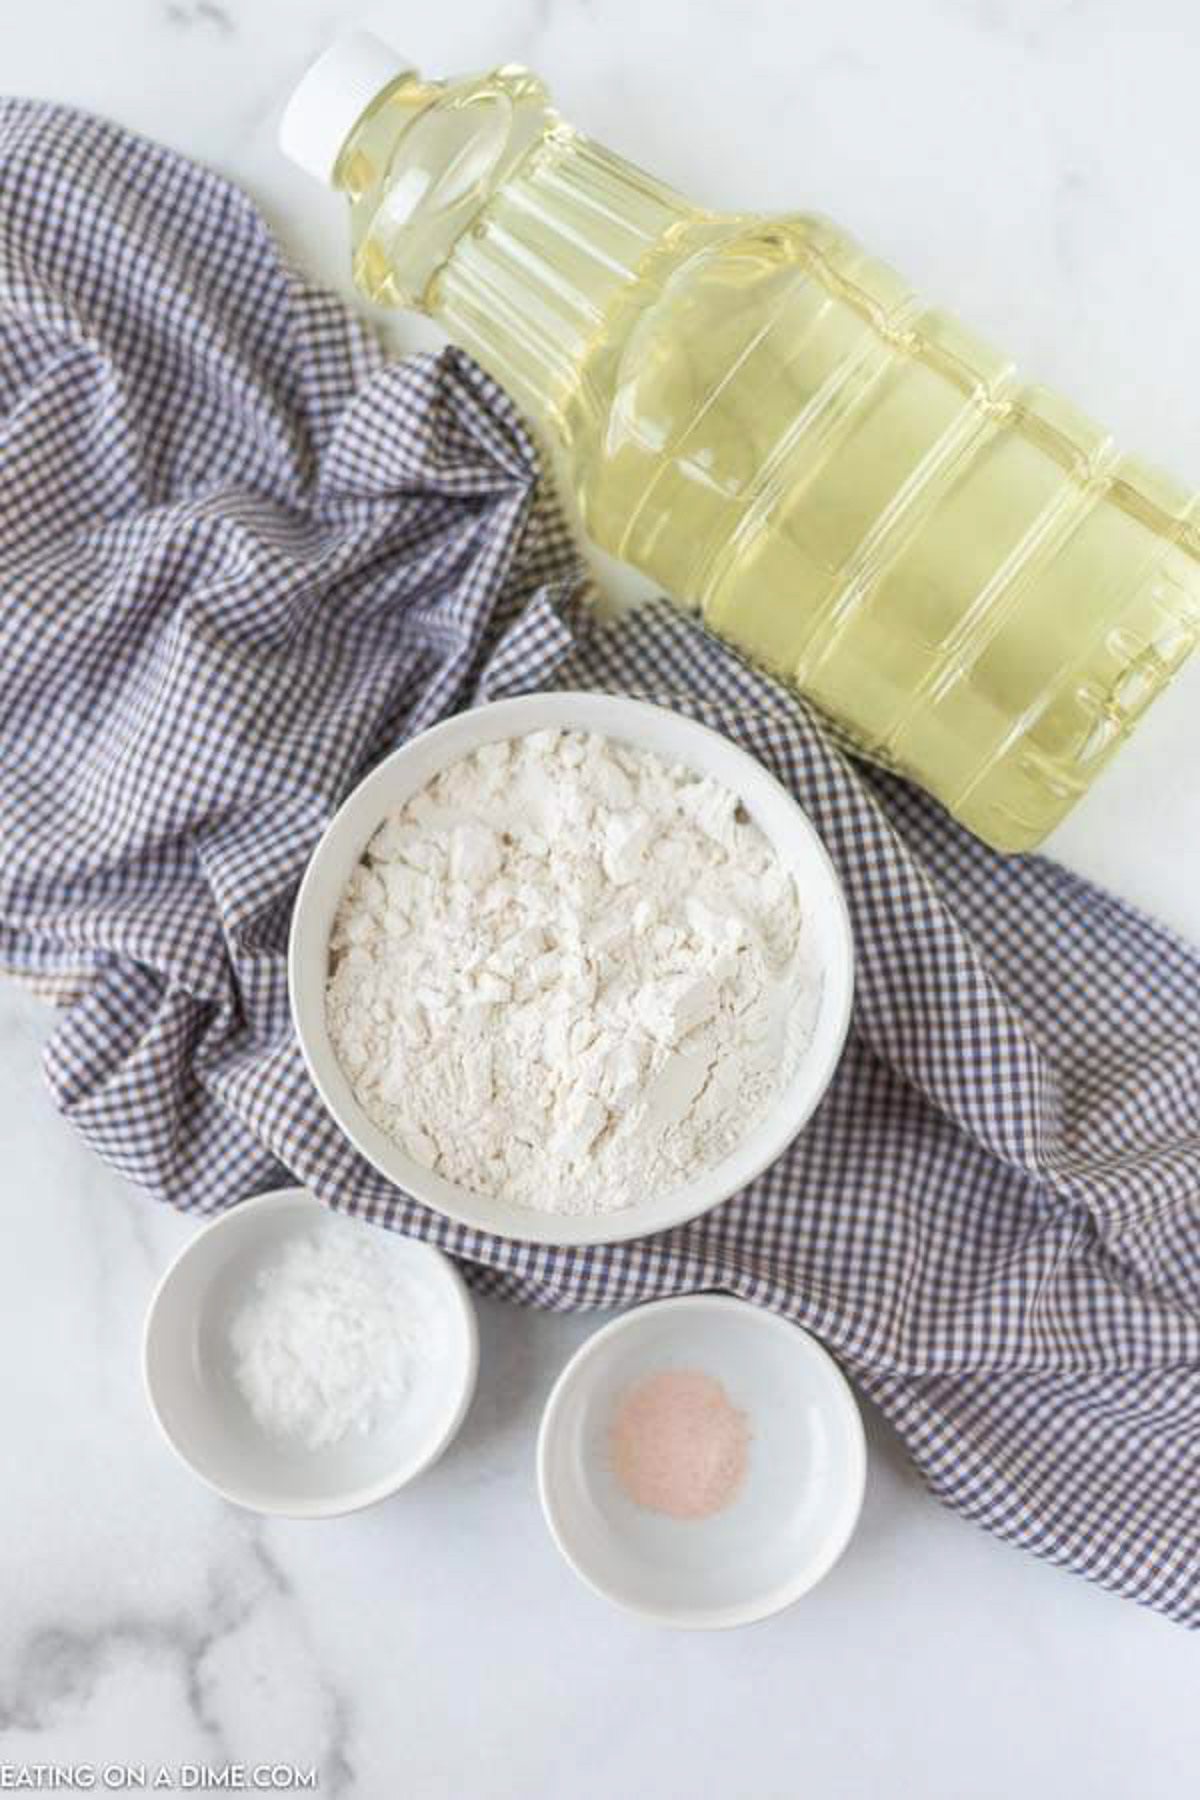 Ingredients needed to make fry bread